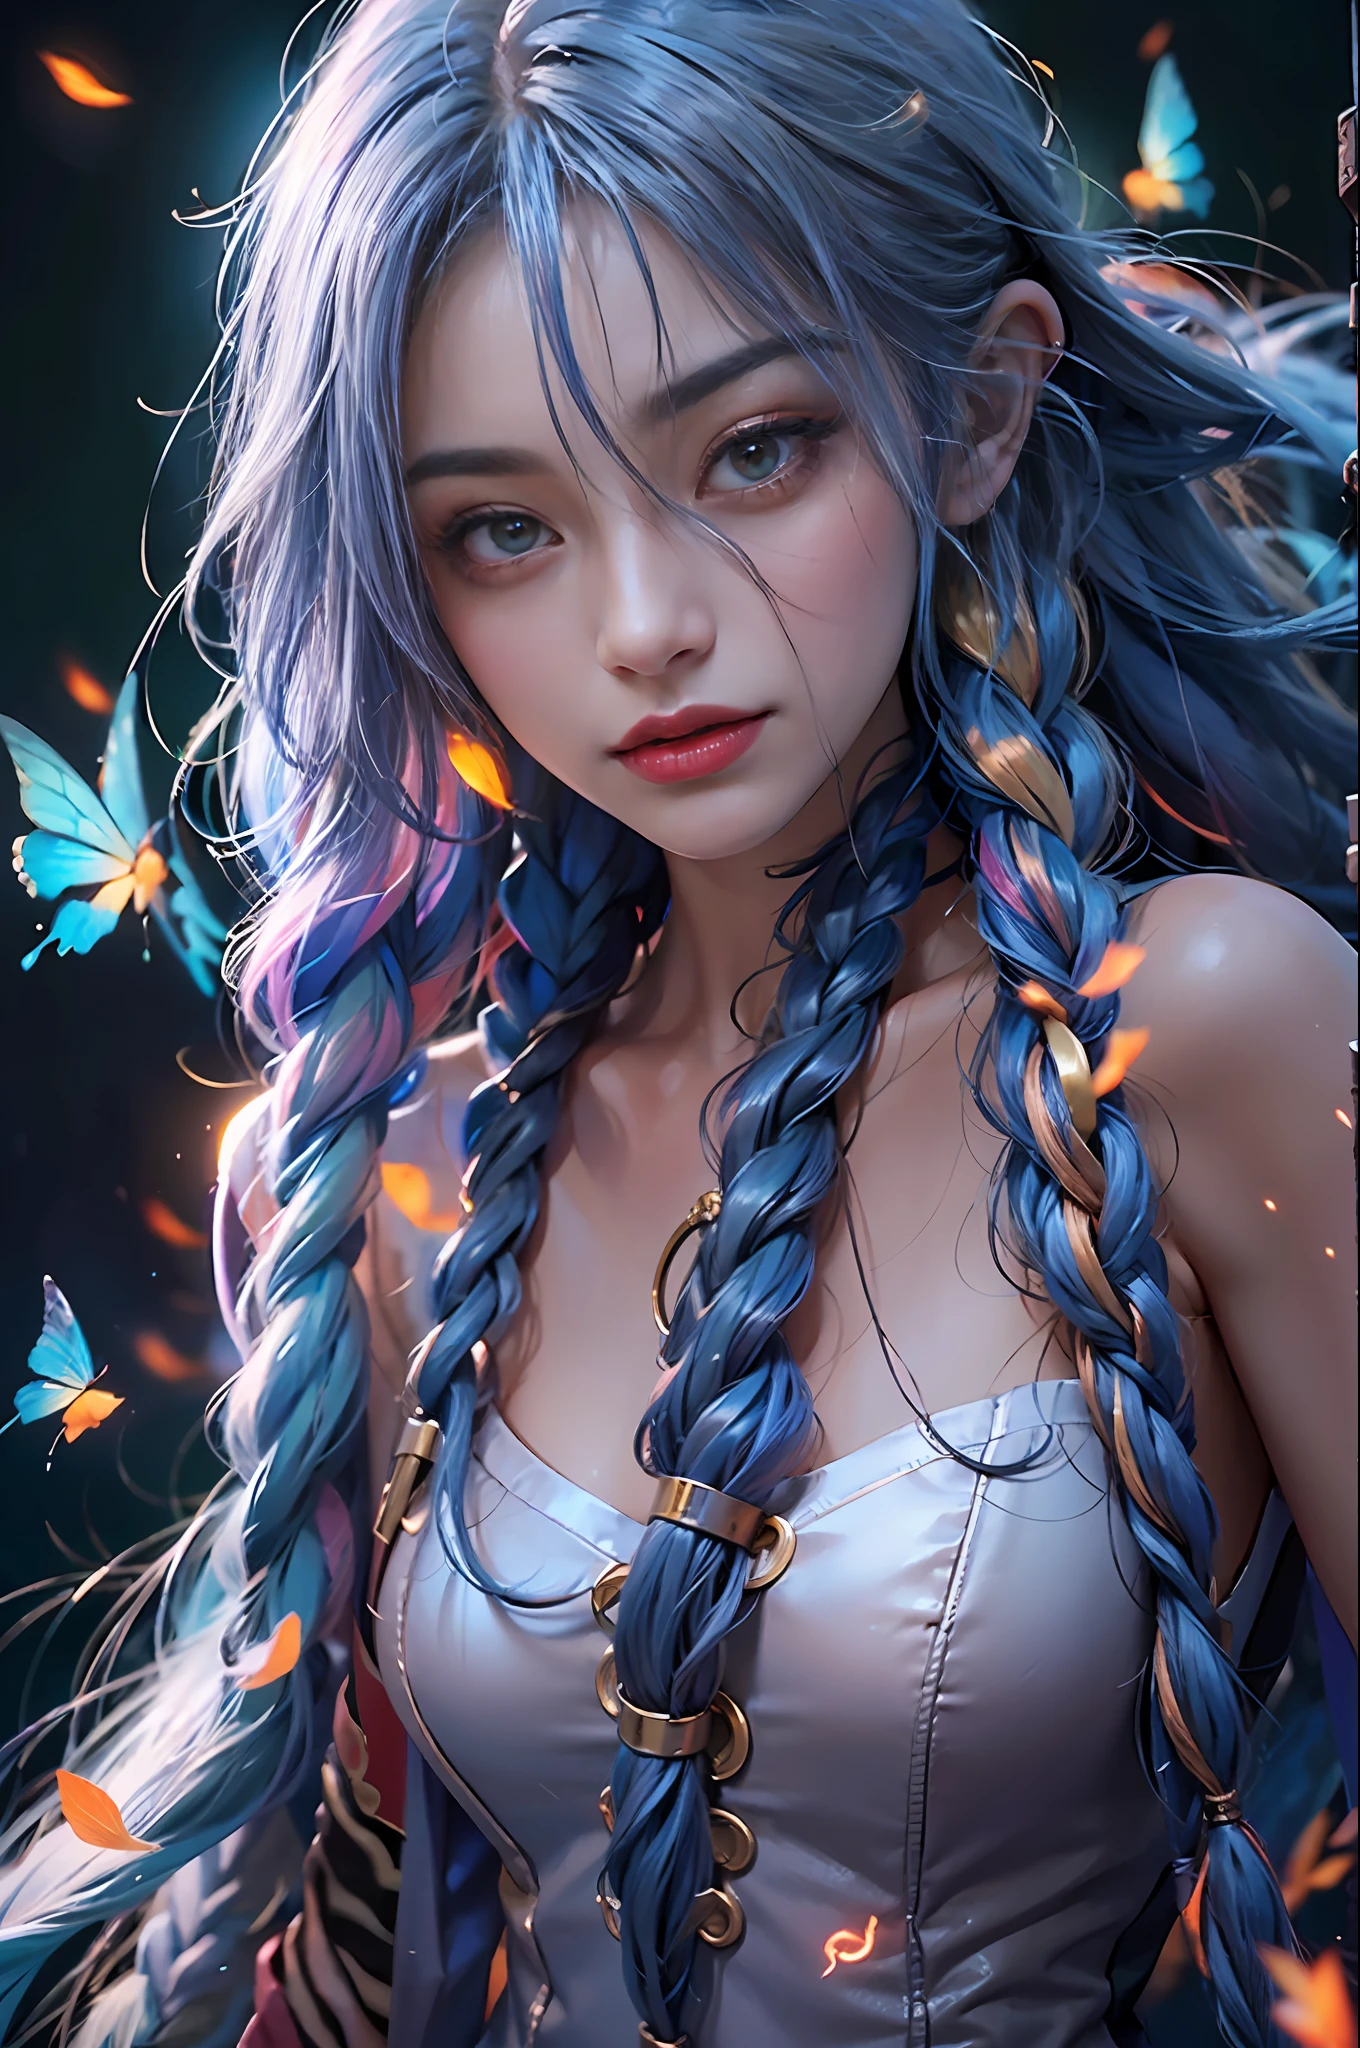 solo, (очень Dетализированные обои CG unity 8k), (beste-Qualit), (best illustrations), (best shadows), (Night gloomy background, Gloomy and hopeless, Dark dramatic lighting, Vignette), Realistic eyes, beatiful face, 1A girl with a perfect body, with blue braids, Long braids, ((Jinx)). generous cleavage, ((She wears a business suit:1.5)), She keeps her hands in her pockets, ((perfect anatomy)), Gothic, Burnt orange gradient, surrounded by tender leaves and branches, with fireflies and glowing particle effects, (Natural elements), (leaves), (Twigs), (Fireflies), Butterflies, (Tender leaves), (Glow), (particle fx). , Fantasy art, bokeh, Octane rendering, ray traced, overdetalization.